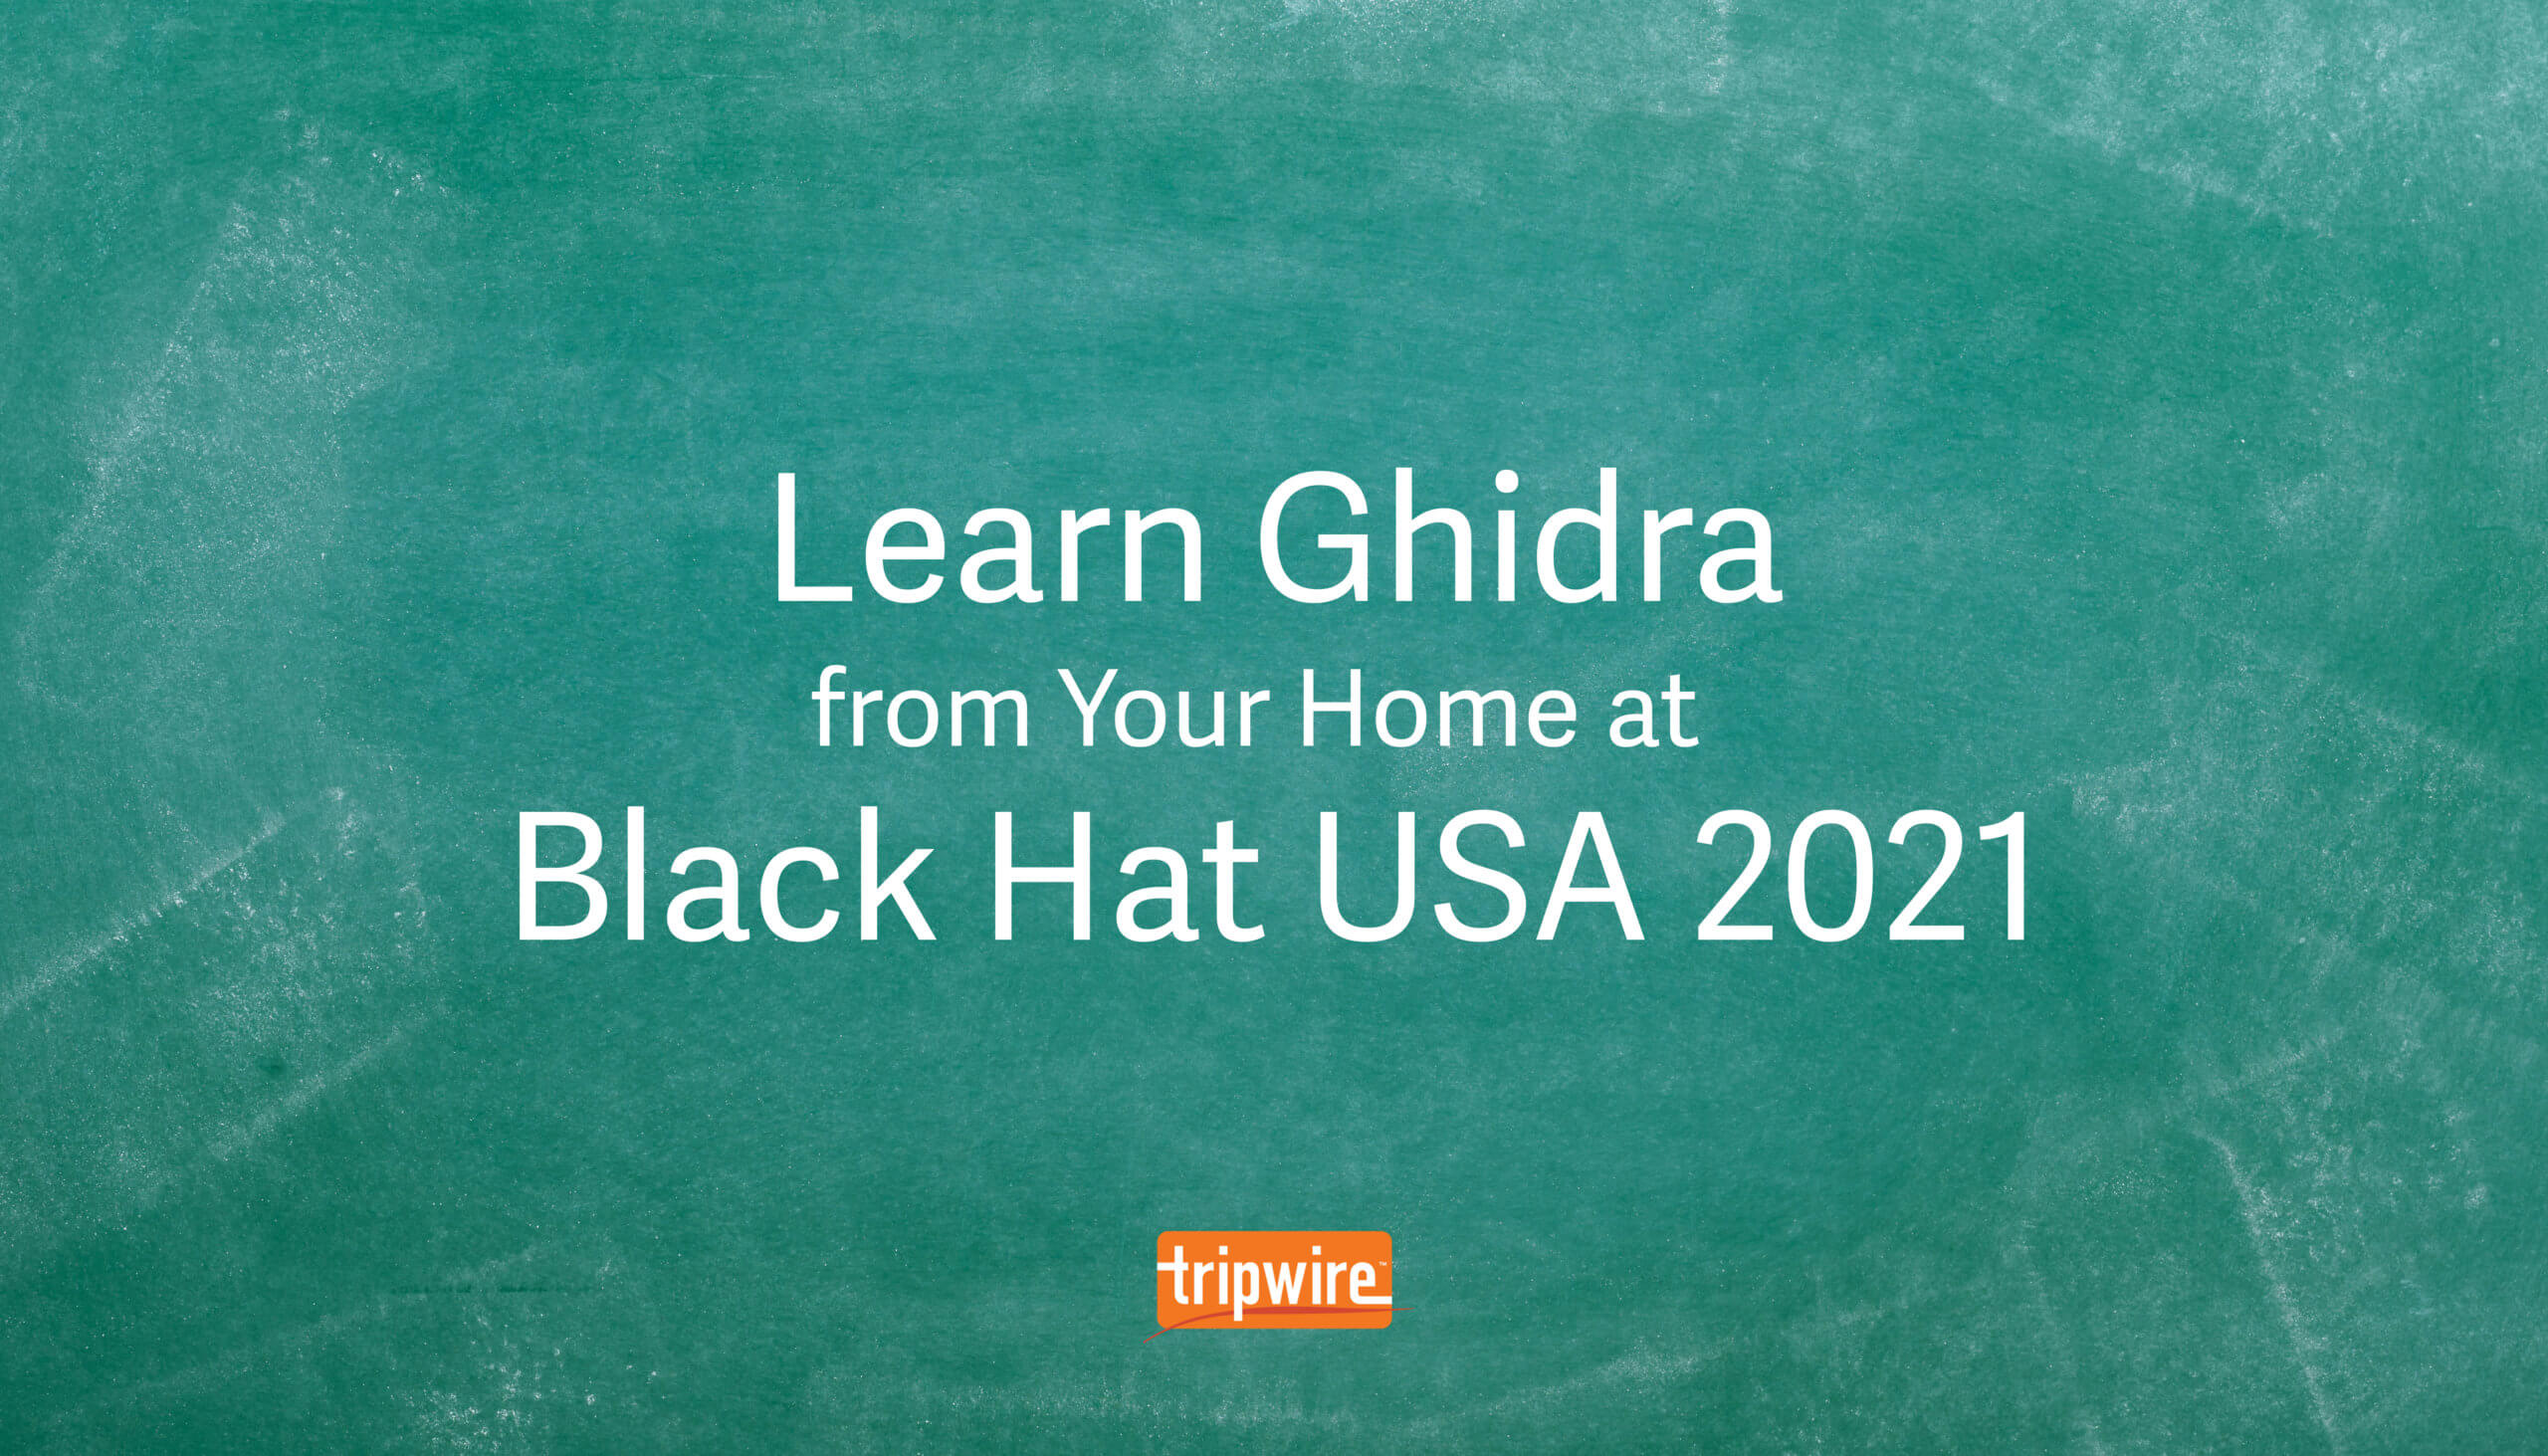 Learn Ghidra from Your Home at Black Hat USA 2021